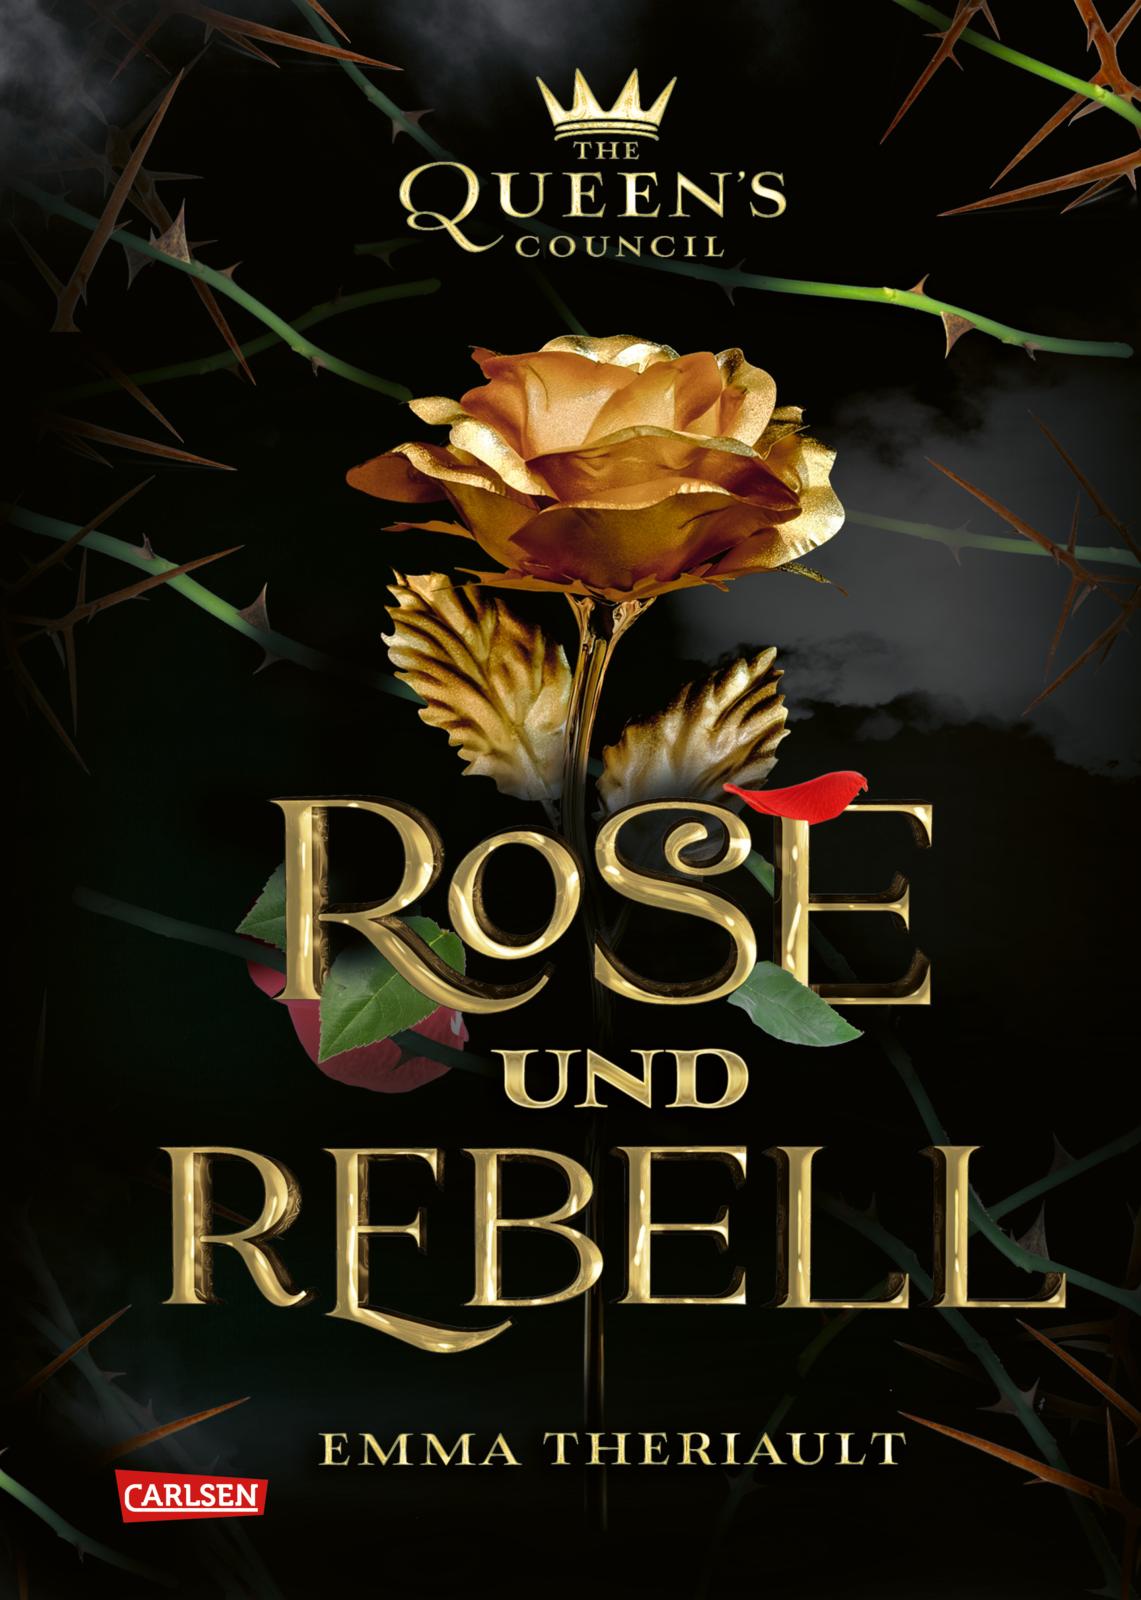 Emma Theriault - The Queen's Council 1: Rose und Rebell